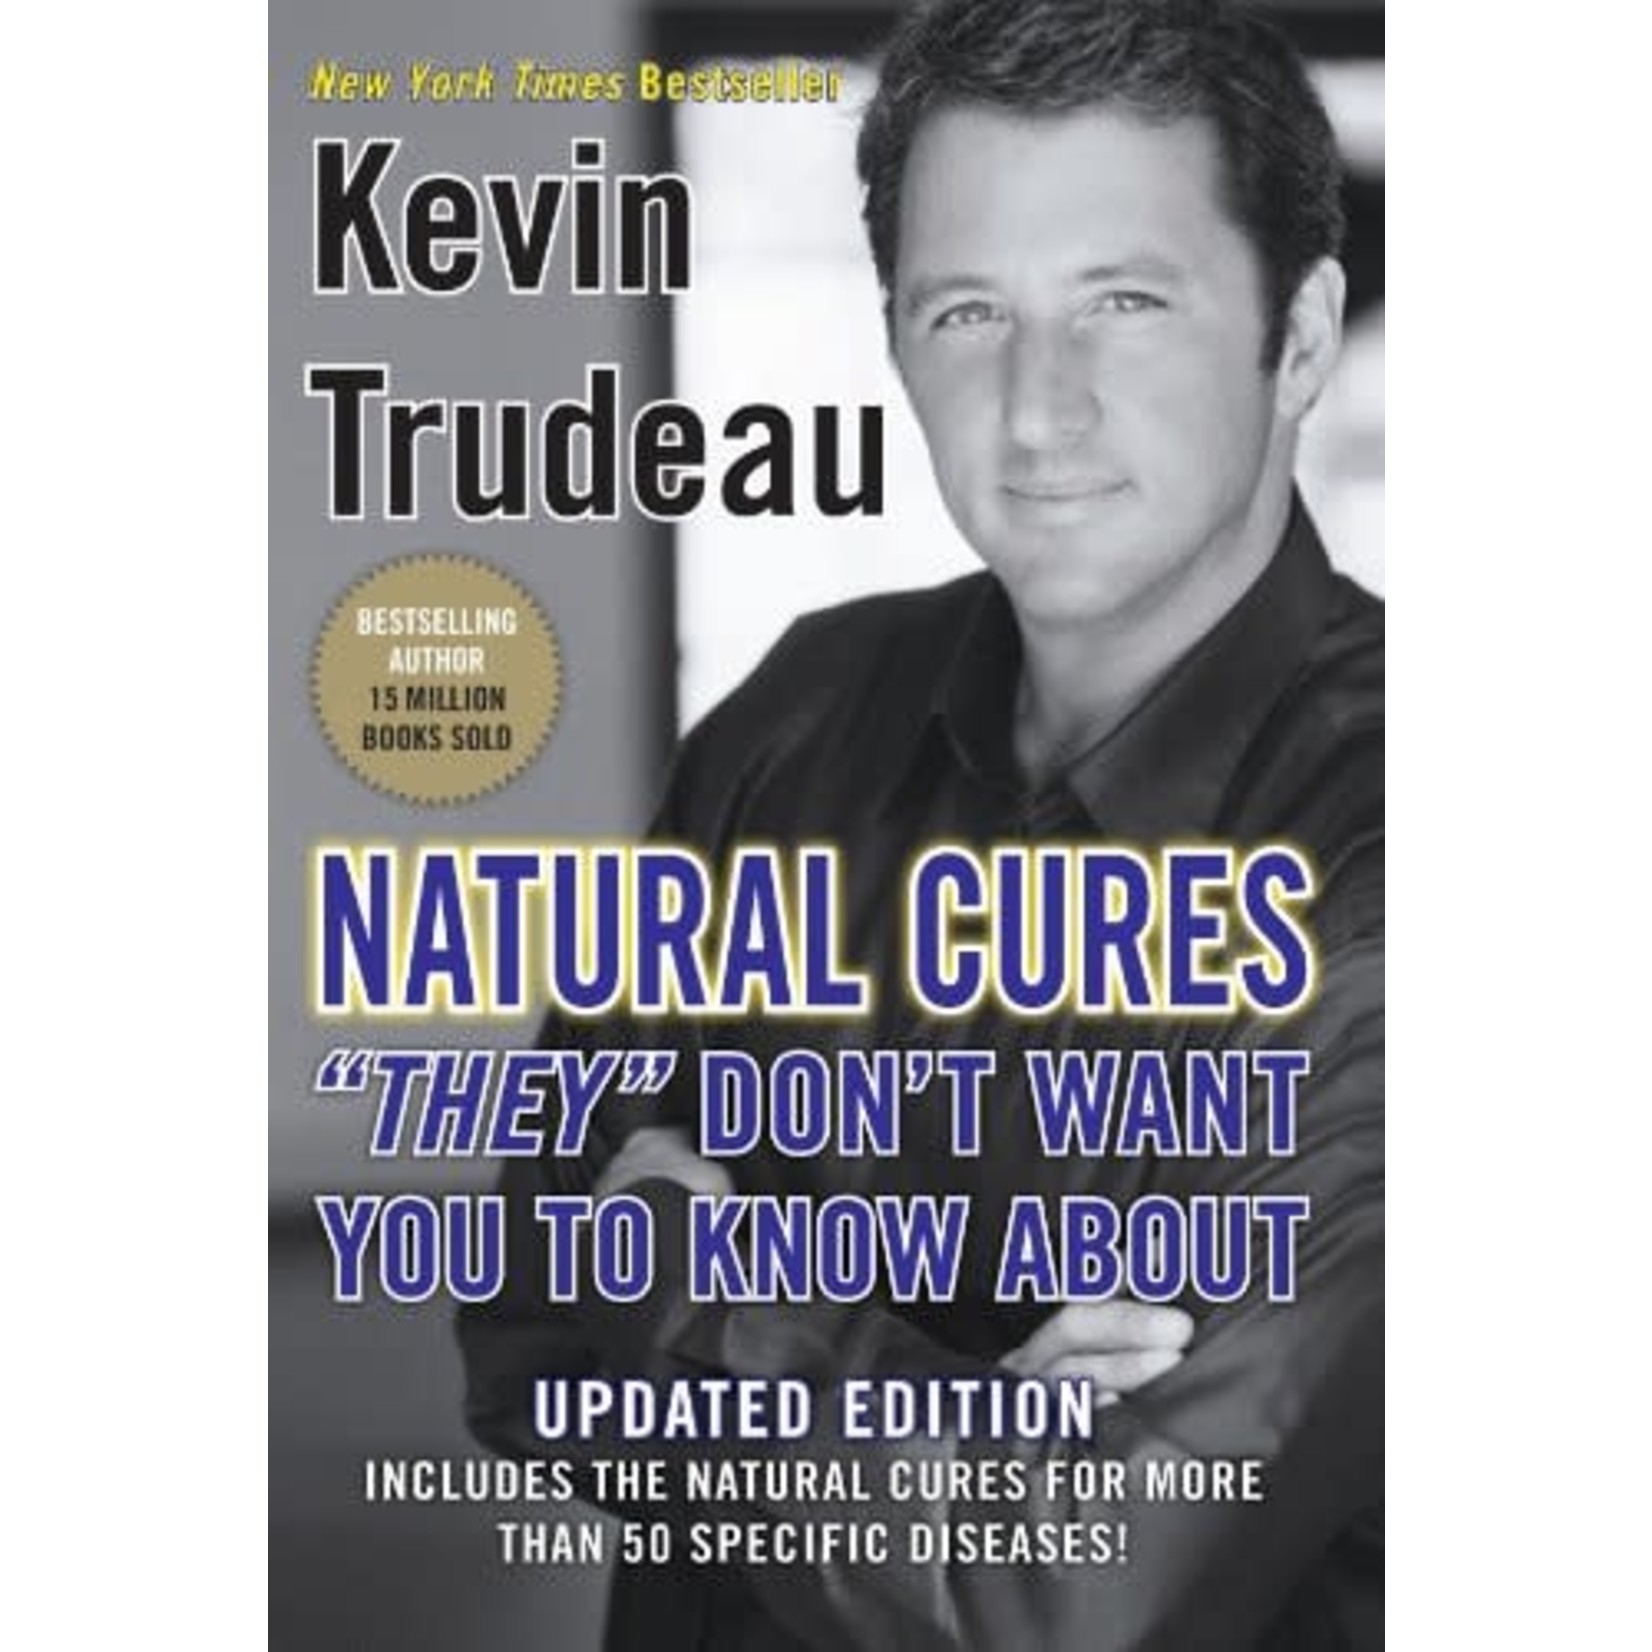 Natural Cure's "They" Don't Want You to Know About